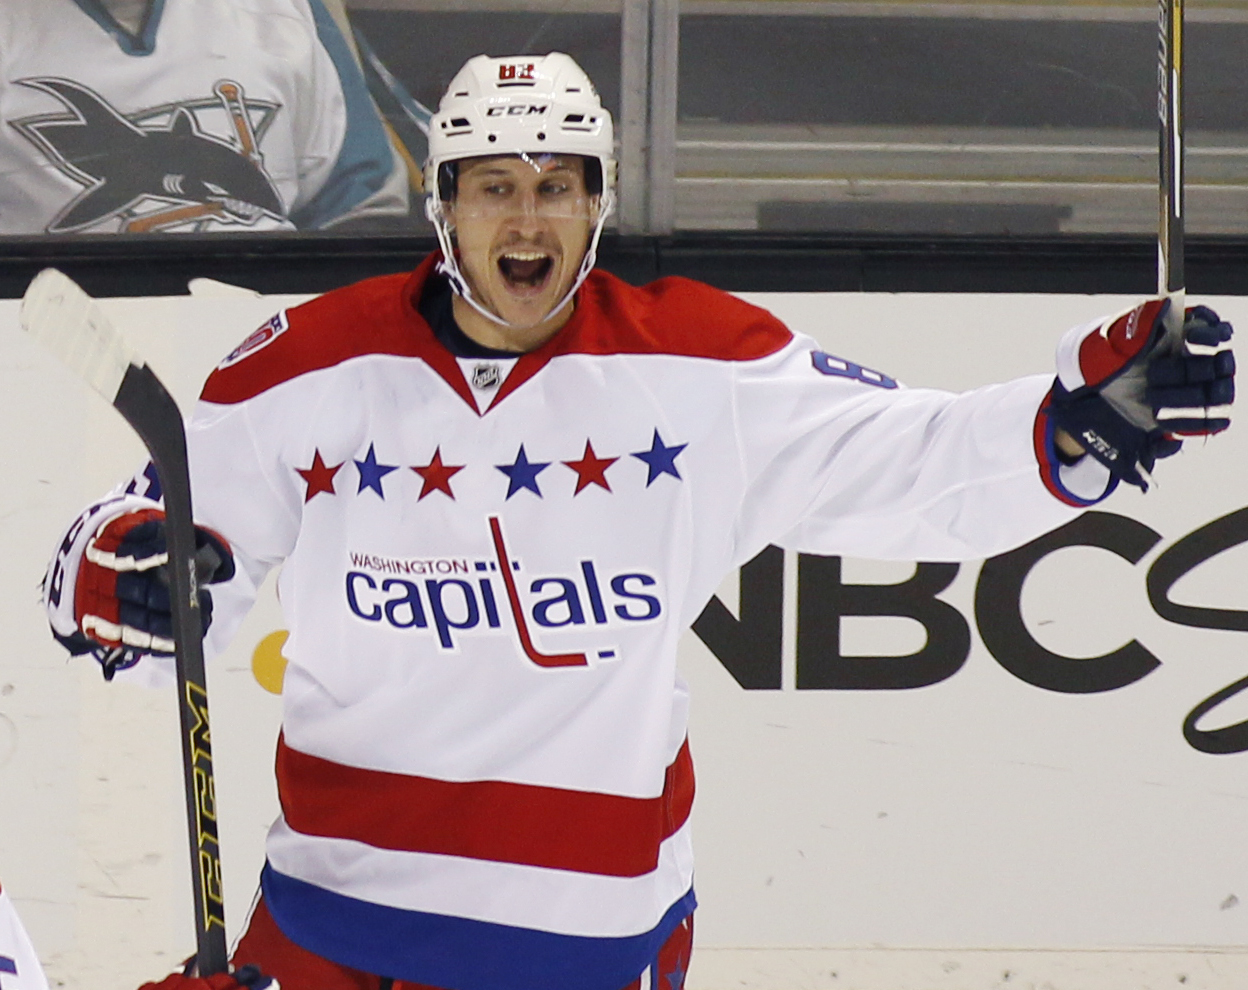 Washington Capitals' Jay Beagle, reacts after scoring a goal against the San Jose Sharks during the first period of an NHL hockey game, Wednesday, Feb. 11, 2015, in San Jose, Calif. (AP Photo/George Nikitin)